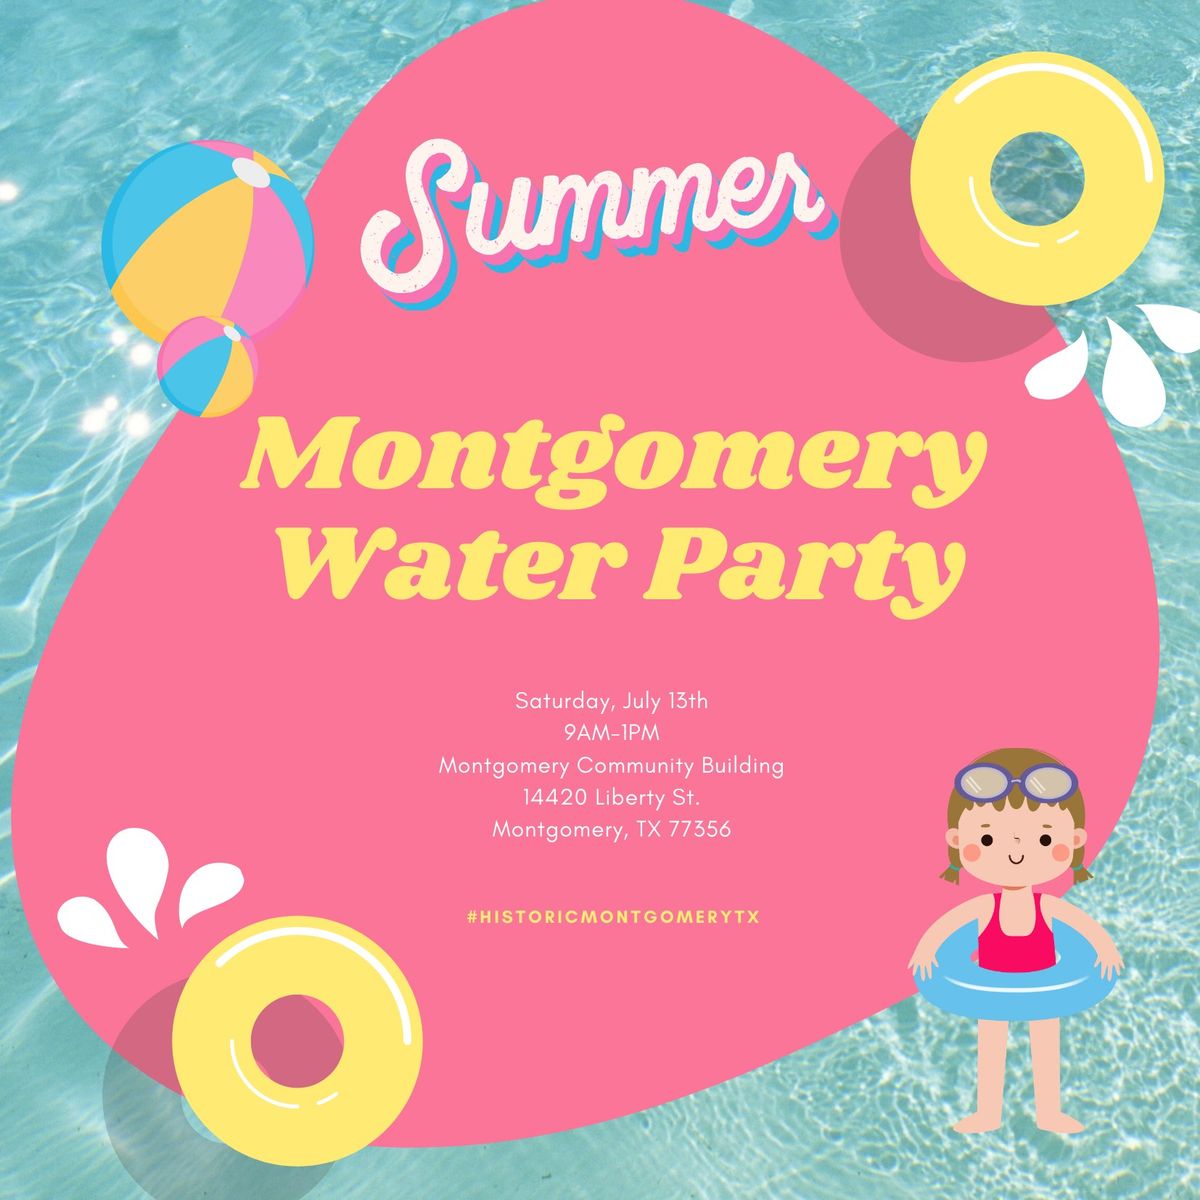 Montgomery Water Party